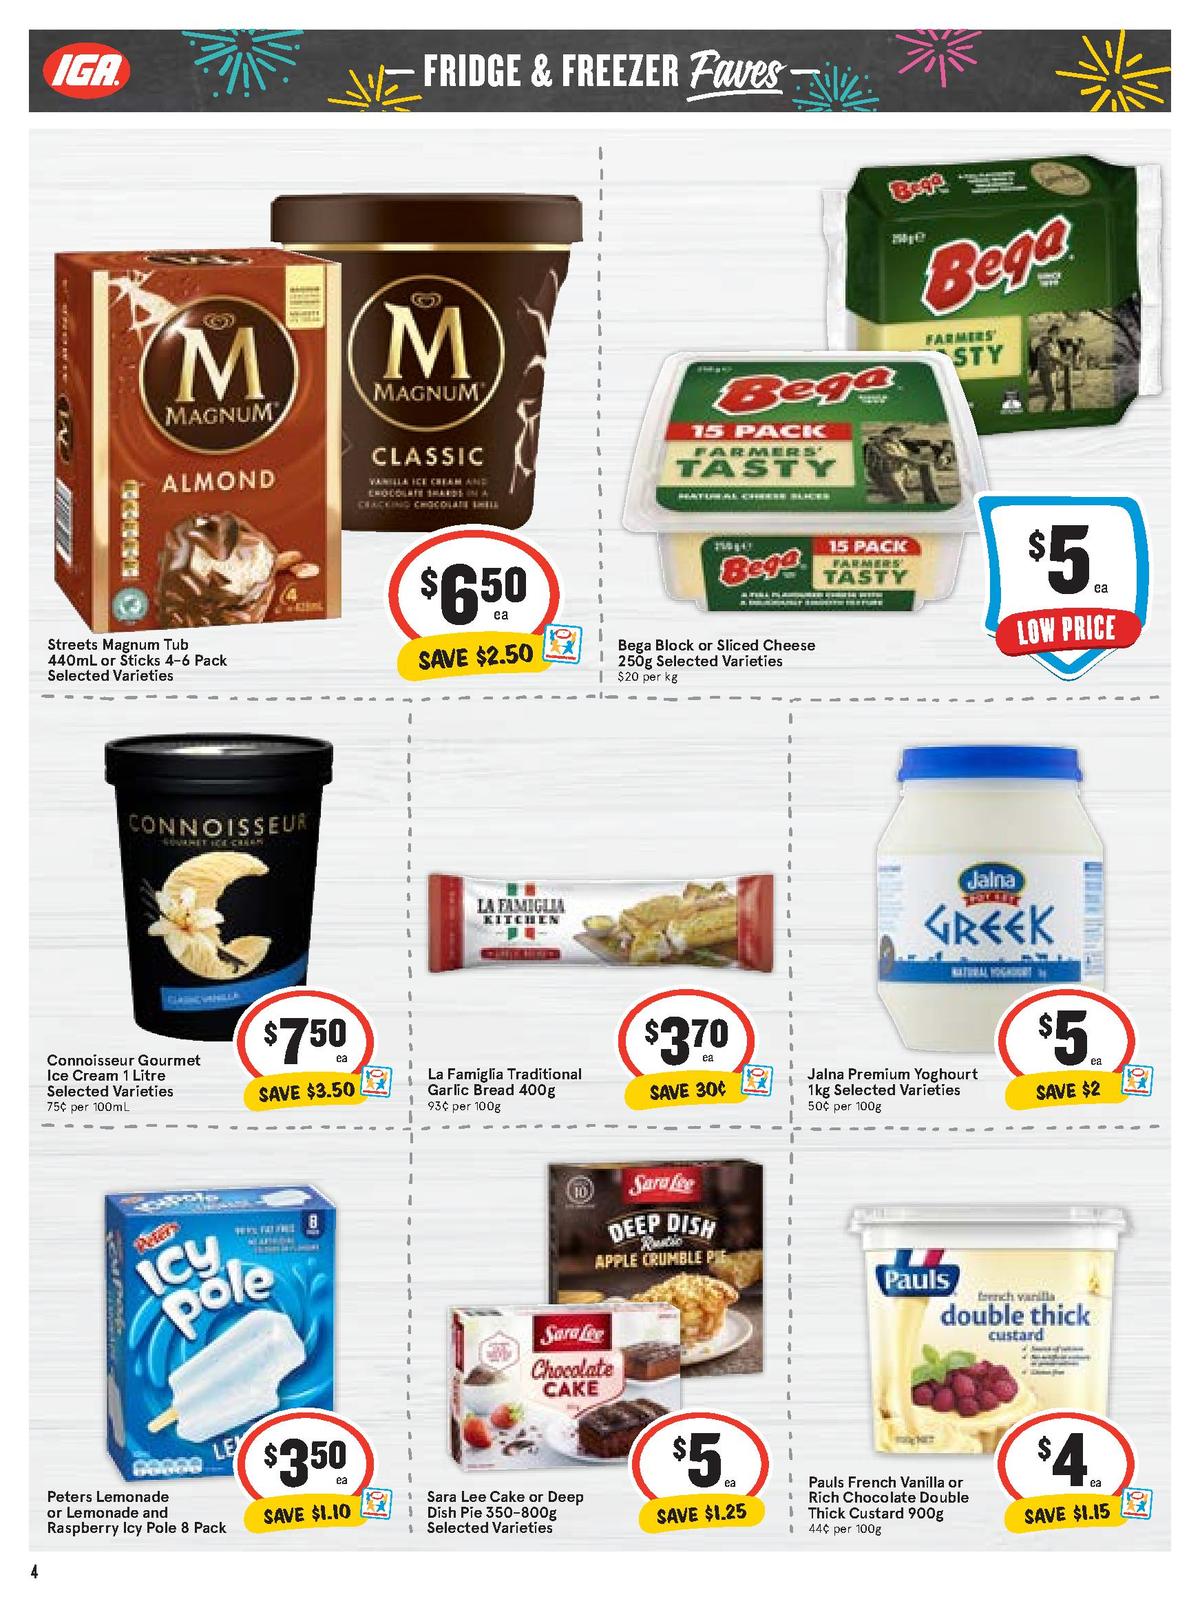 IGA Catalogues from 25 December